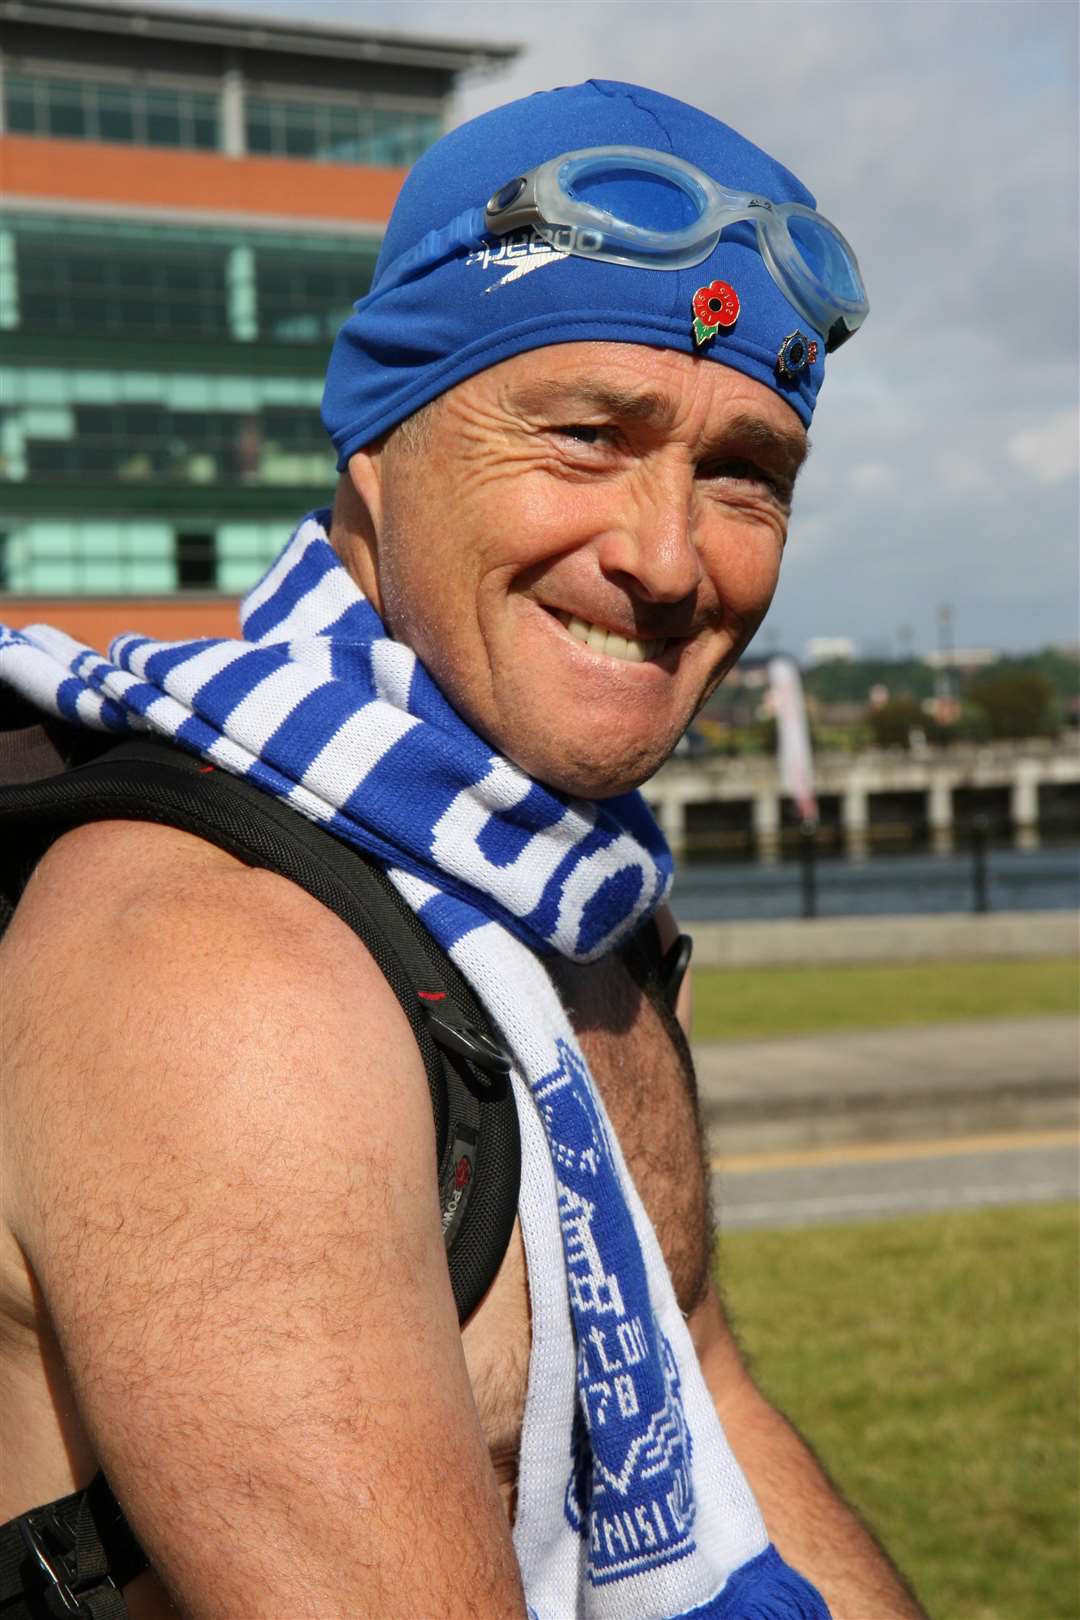 Speedo Mick has dedicated his life to helping others.